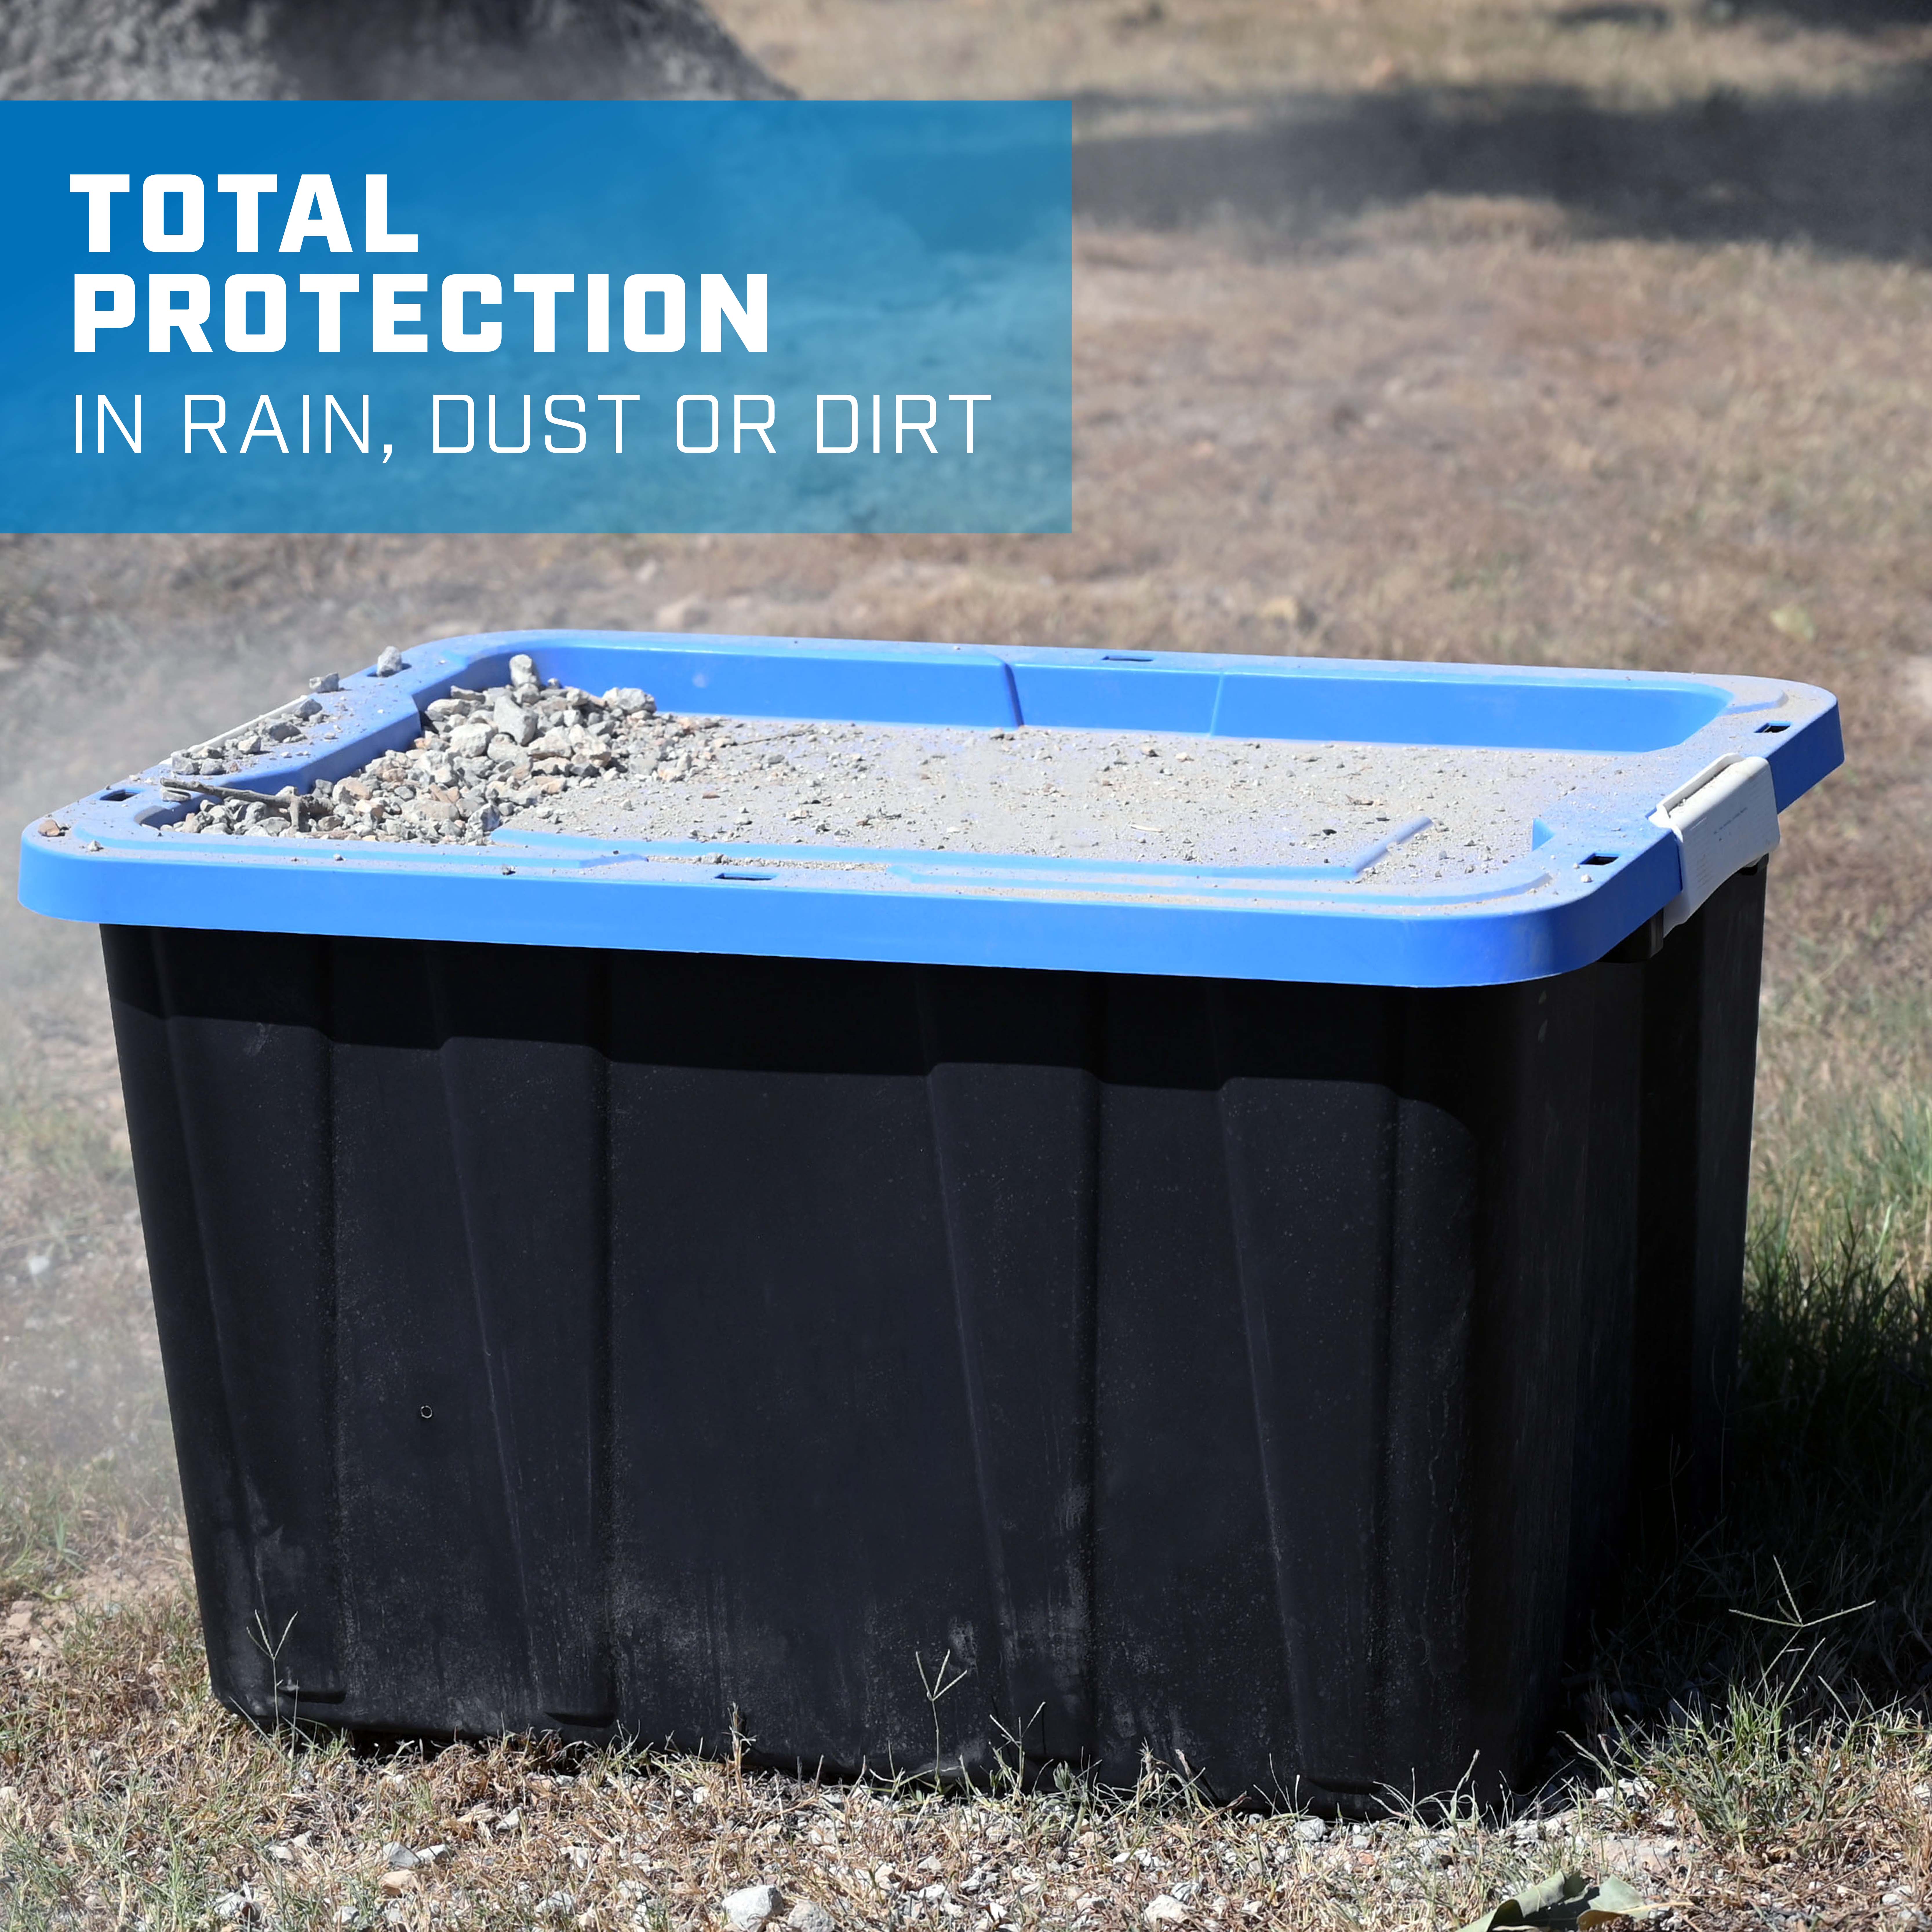 total protection in rain, dust, or dirt